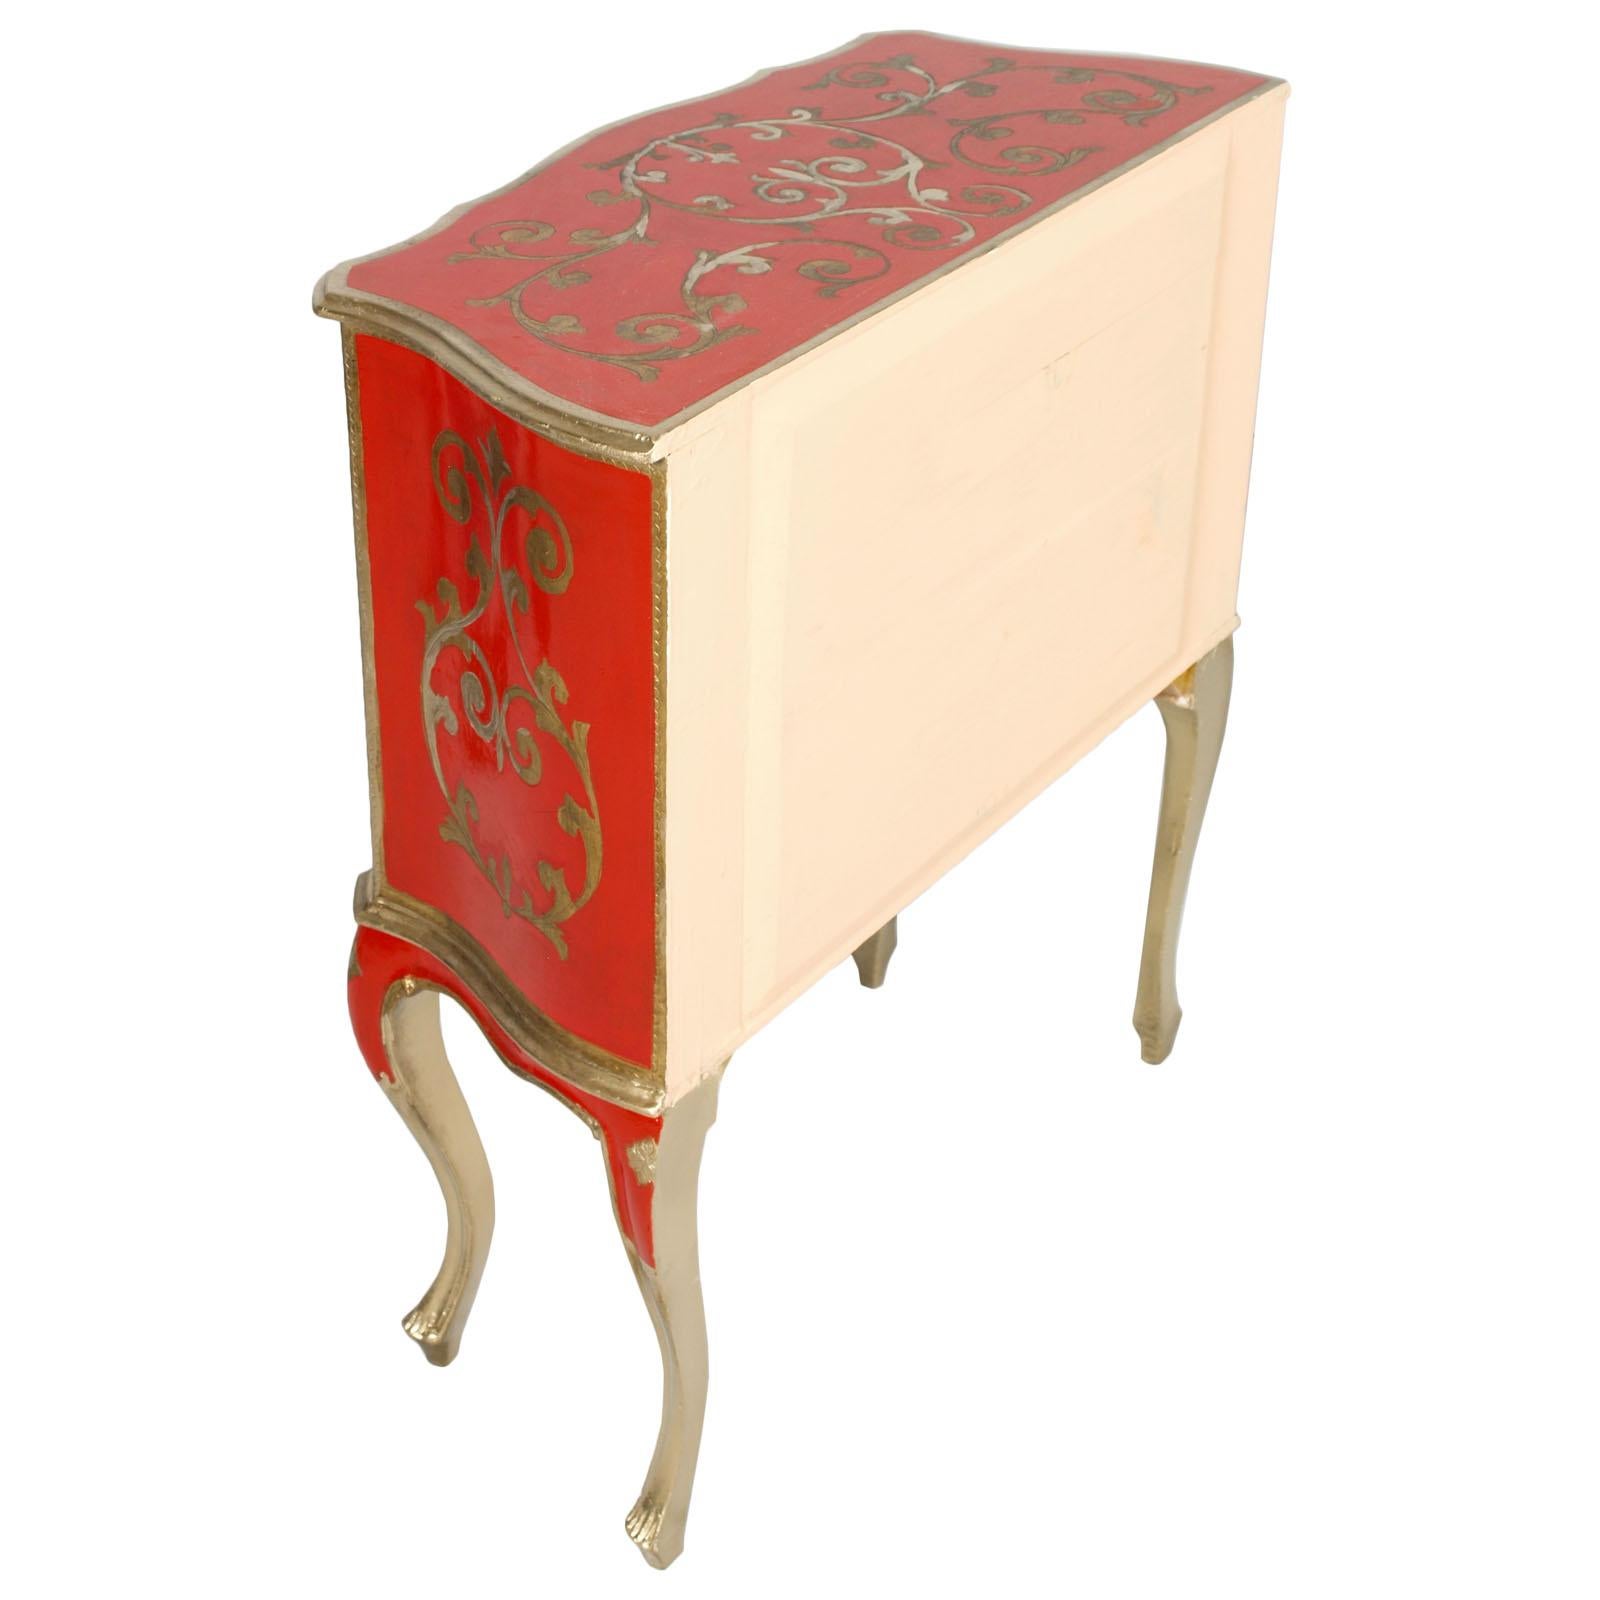 Early 1900s Small Sideboard from Florence, Gold Leaf and Florentine Red Lacquer In Excellent Condition For Sale In Vigonza, Padua